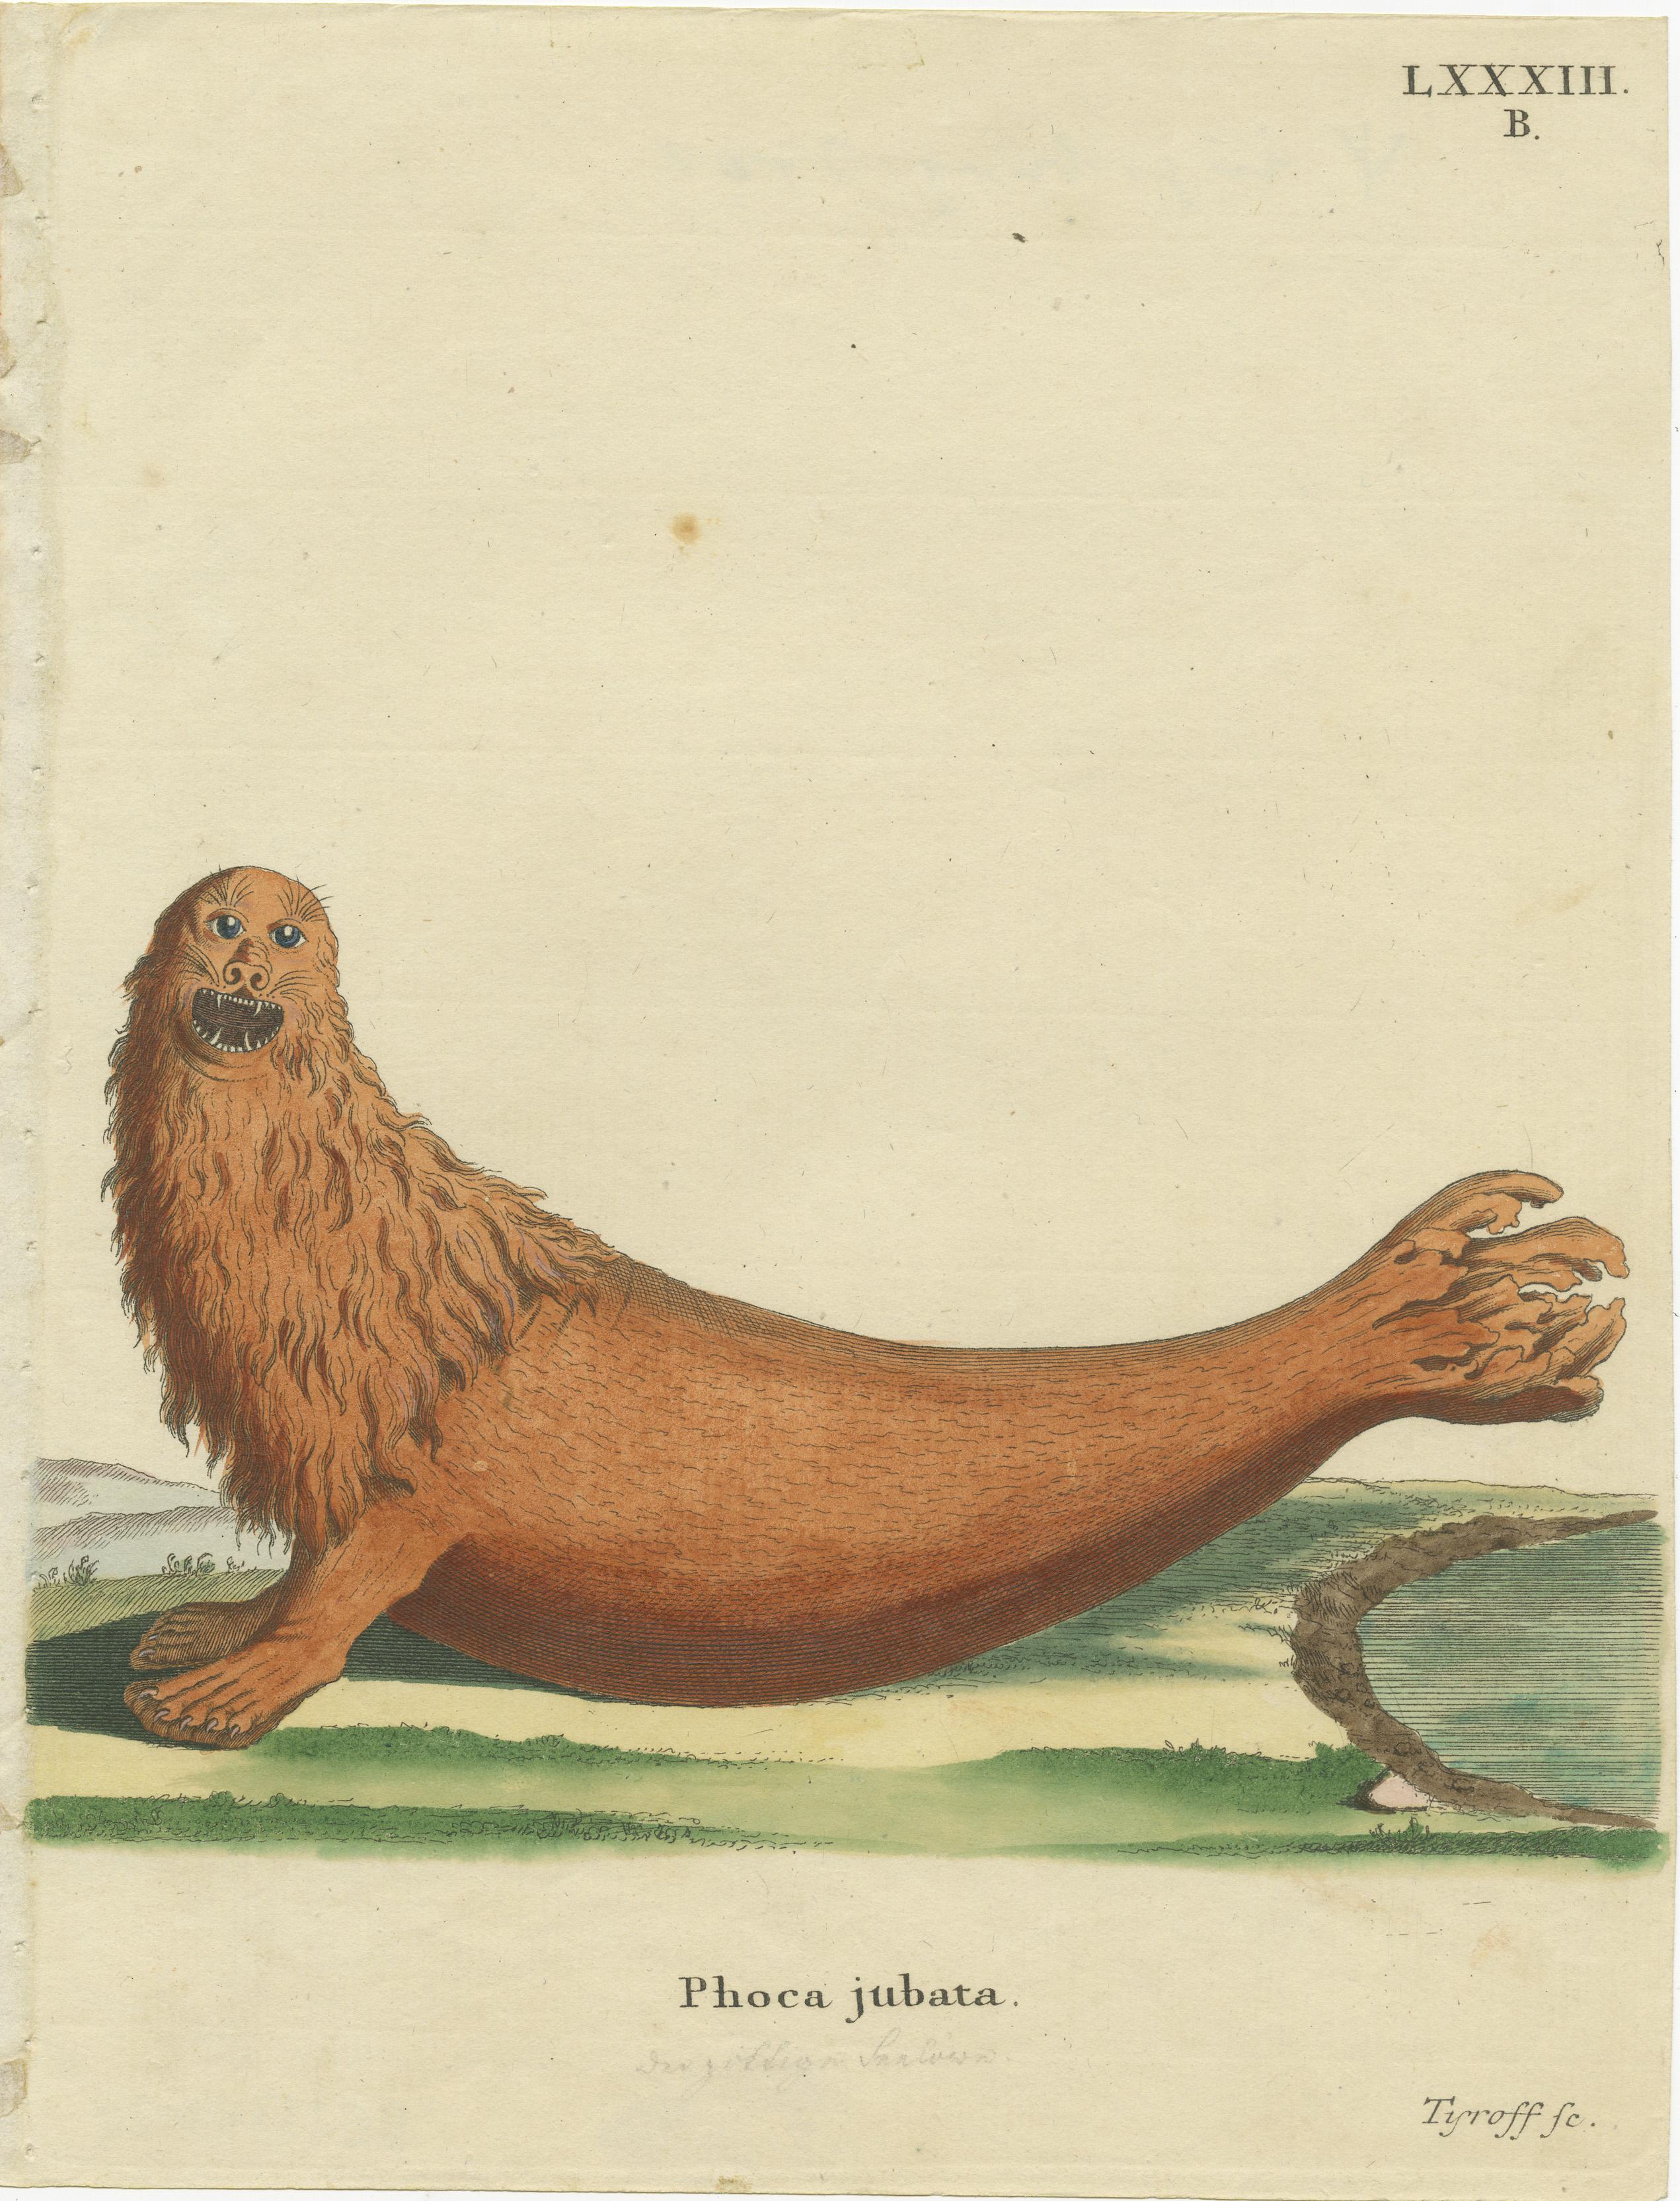 Beautiful original old print of a steller sea lion. The Steller sea lion (Eumetopias jubatus), also known as the Steller's sea lion and northern sea lion, is a near-threatened species of sea lion in the northern Pacific. It is the sole member of the